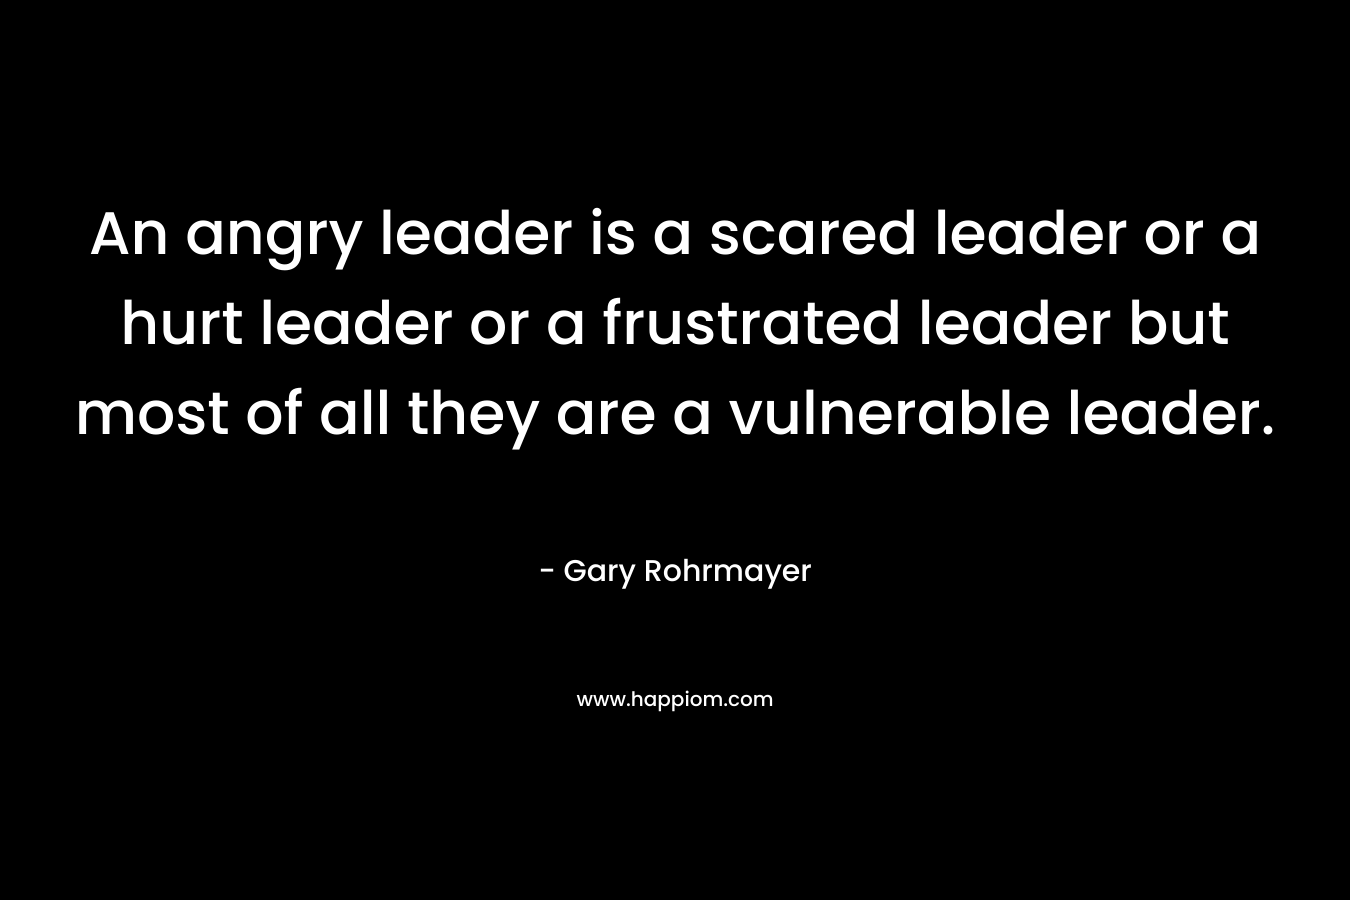 An angry leader is a scared leader or a hurt leader or a frustrated leader but most of all they are a vulnerable leader.